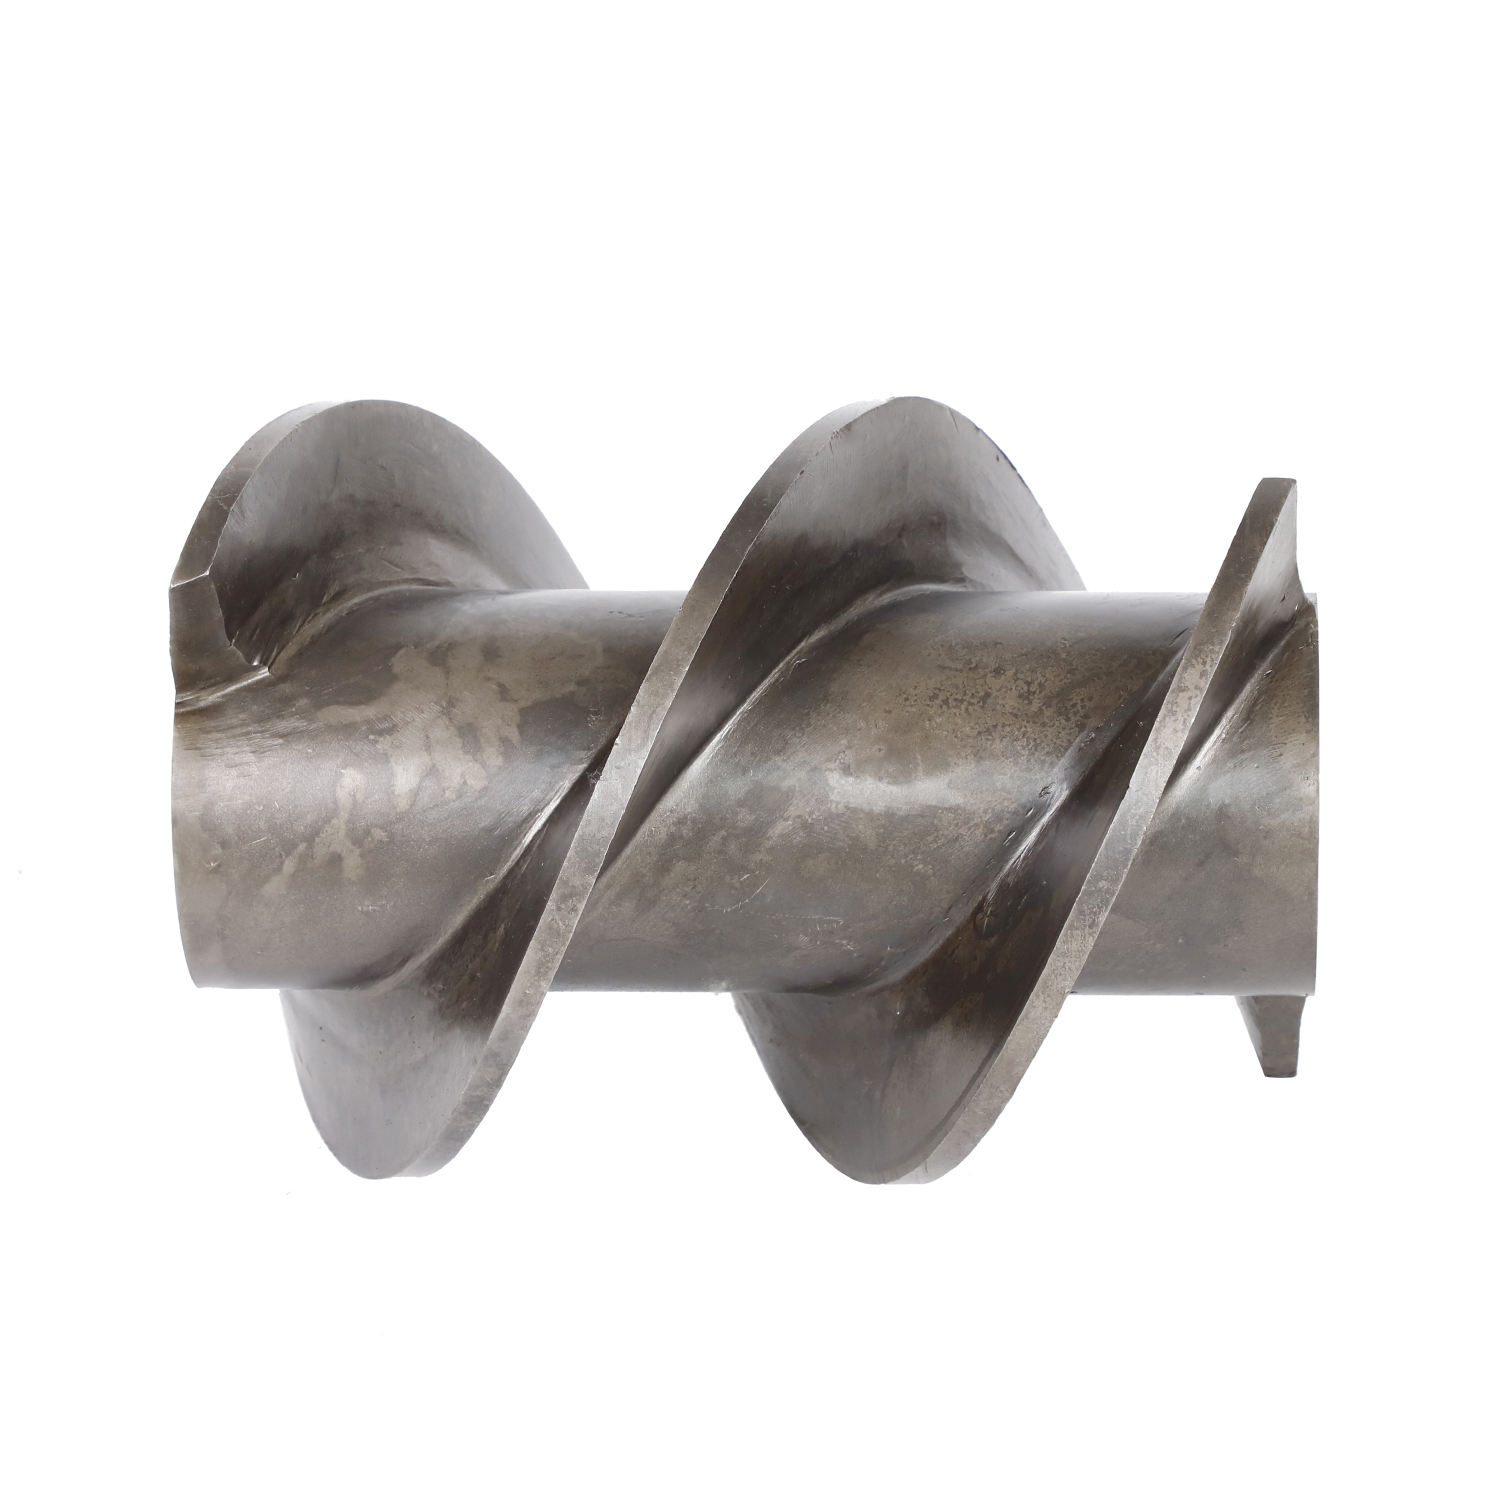 6yl-95100 cake outlet head bearing shell 70 bear short spindle screw oil press shaft spare parts